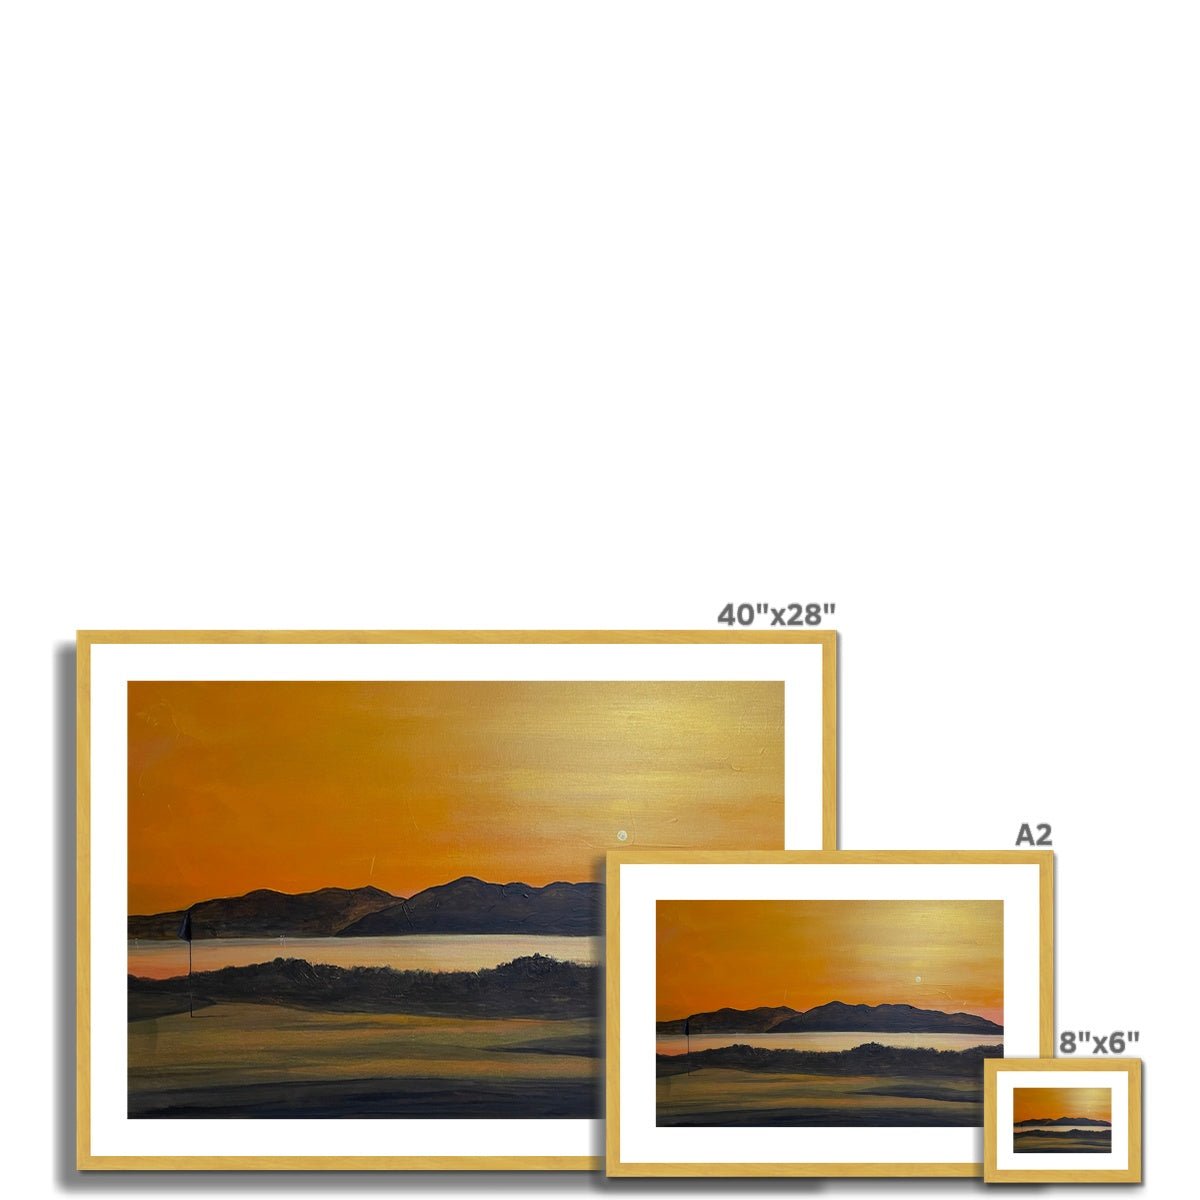 Arran & The 5th Green Royal Troon Golf Course Painting | Antique Framed & Mounted Prints From Scotland-Antique Framed & Mounted Prints-Arran Art Gallery-Paintings, Prints, Homeware, Art Gifts From Scotland By Scottish Artist Kevin Hunter